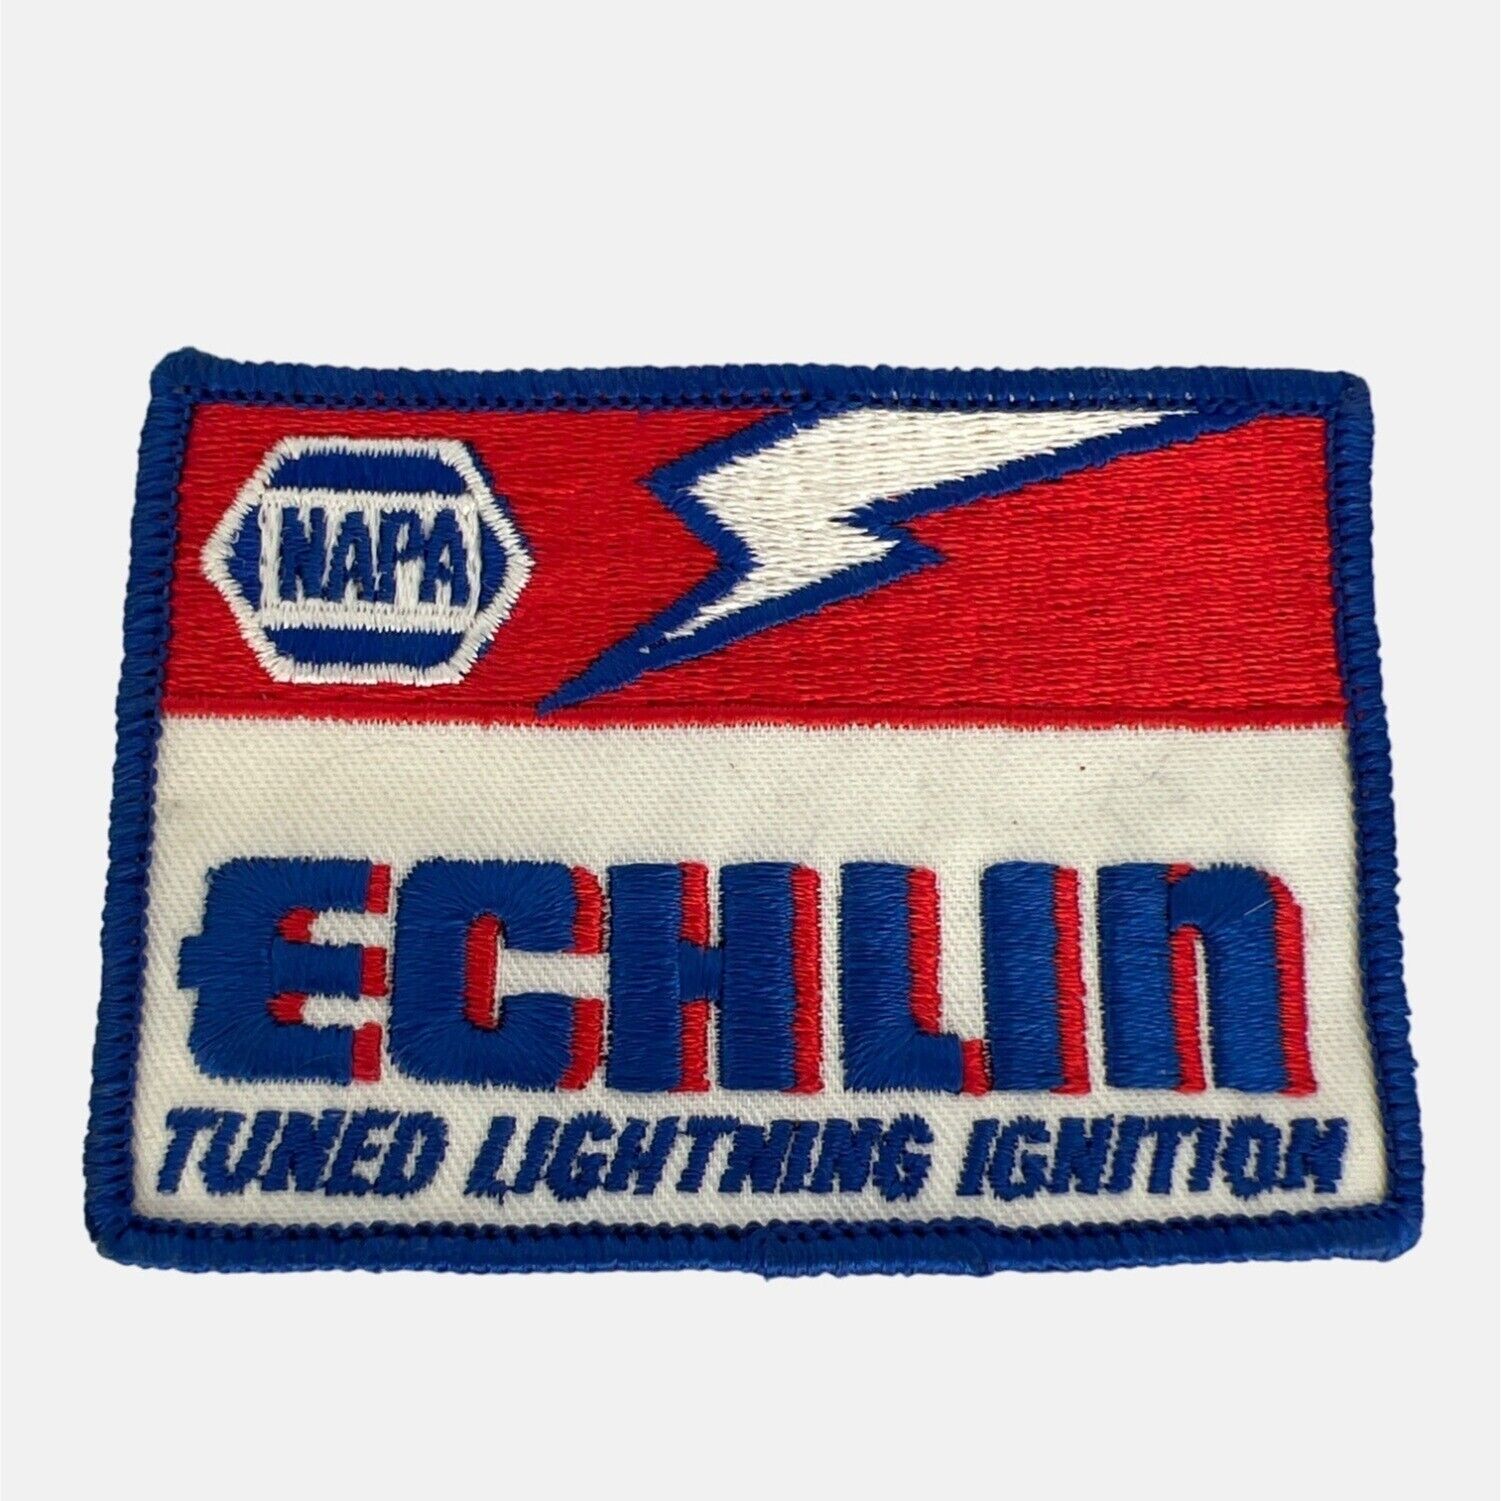 Vintage NAPA Echlin Tuned Lighting Ignition Sew-On Patch Racing 3.75\